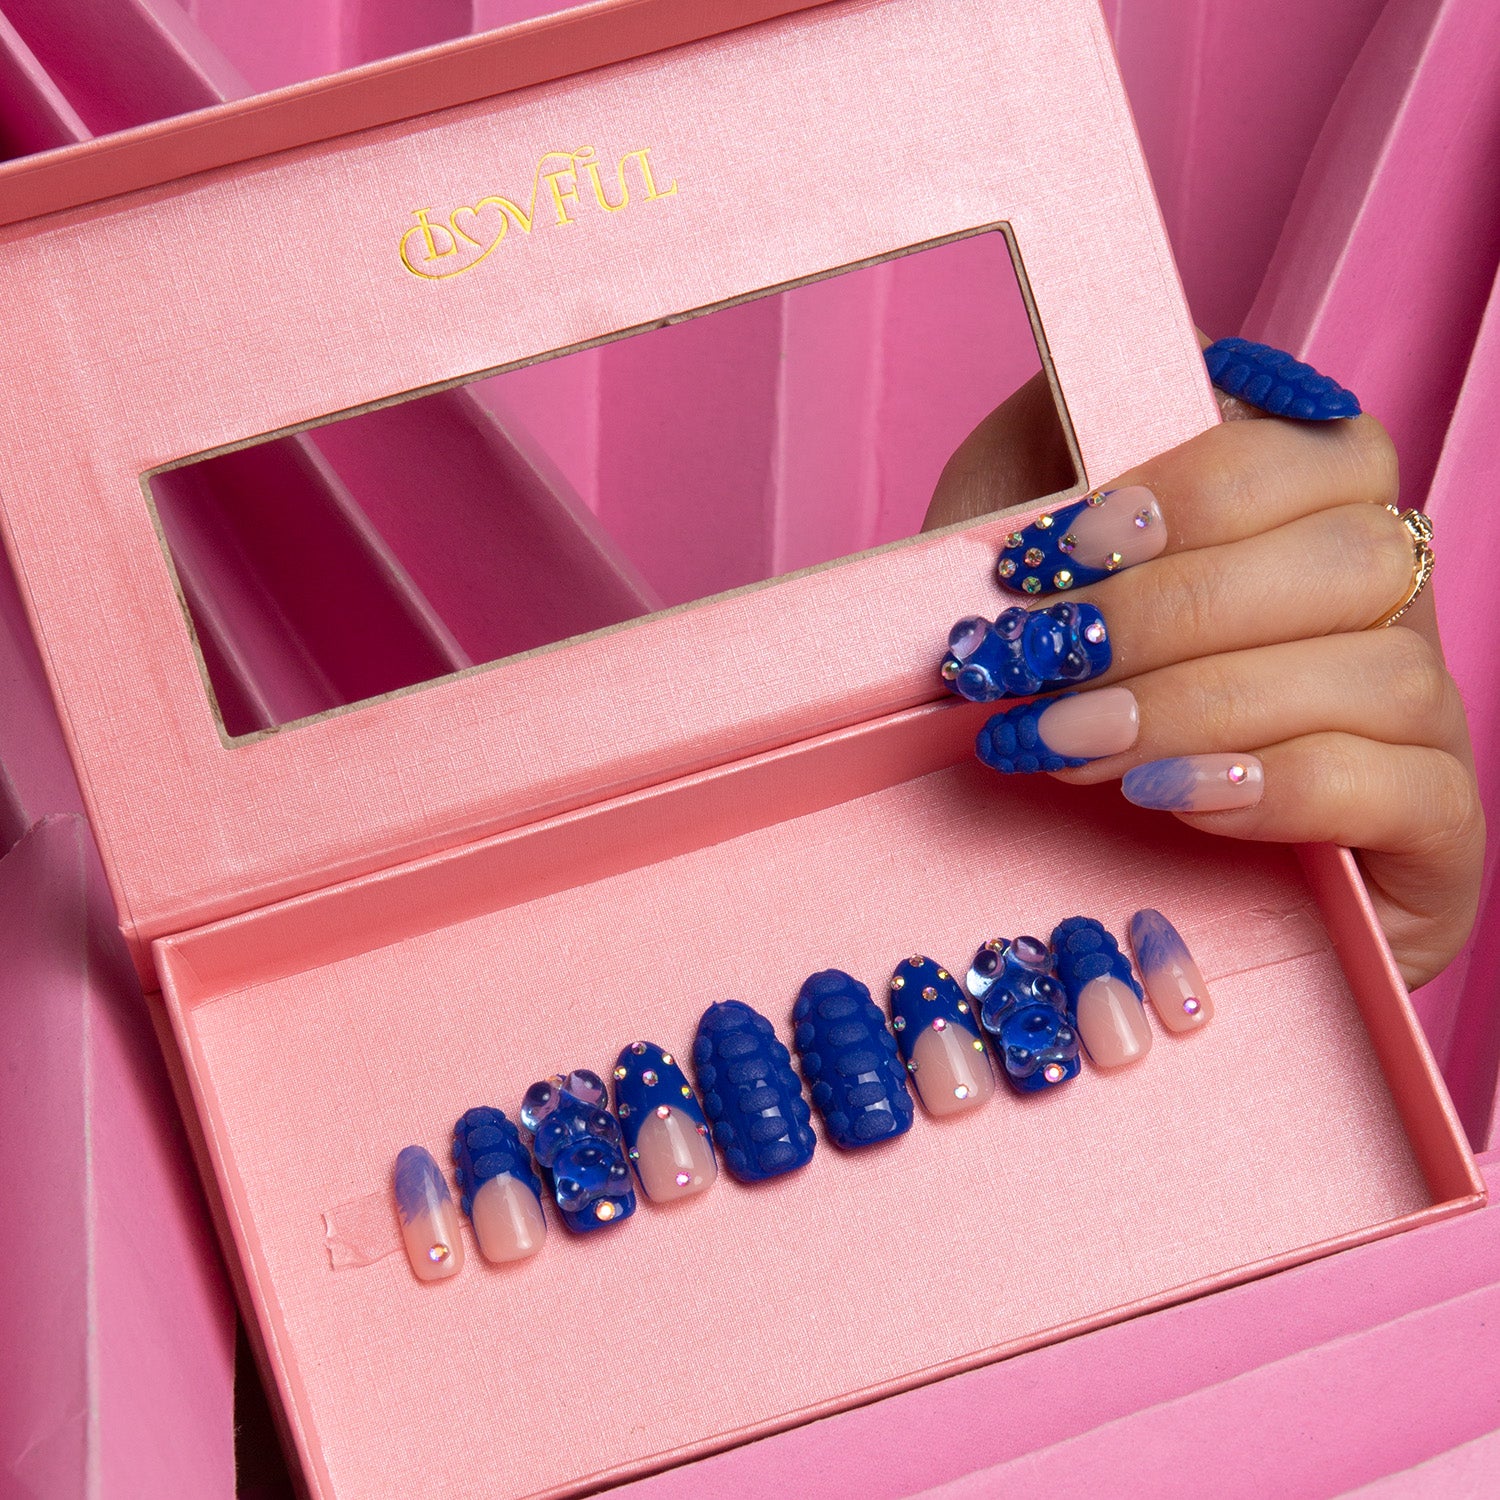 Little Blue Bear Rhinestone French tip press-on acrylic nails in a pink presentation box, featuring blue gummy bear designs and shiny rhinestones. Hand showcasing the nail design while holding the box.